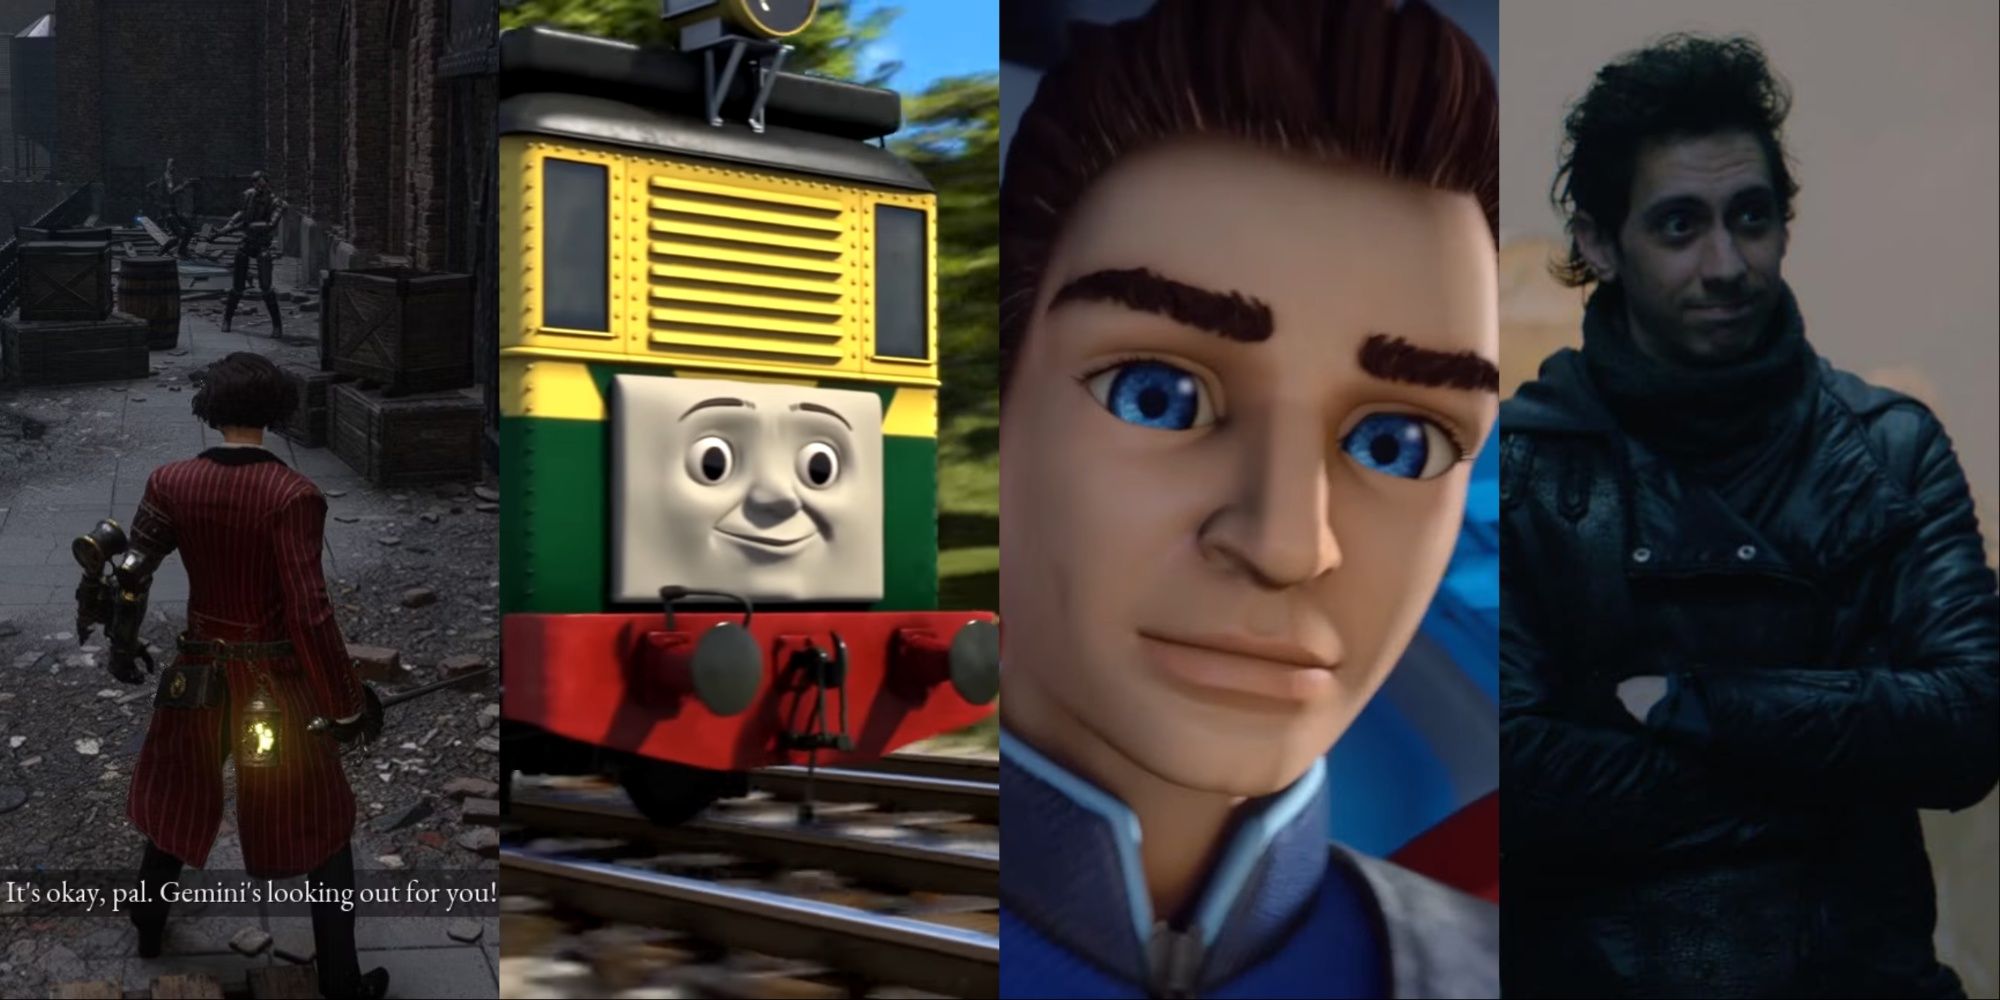 Four-image collage of Gemini giving reassurance to Pinocchio in the glowing lamp, the train character Phillip in Thomas & Friends, his character Scott Tracy in Thunderbirds Are Go, and Rasmus as Kem in Krypton.